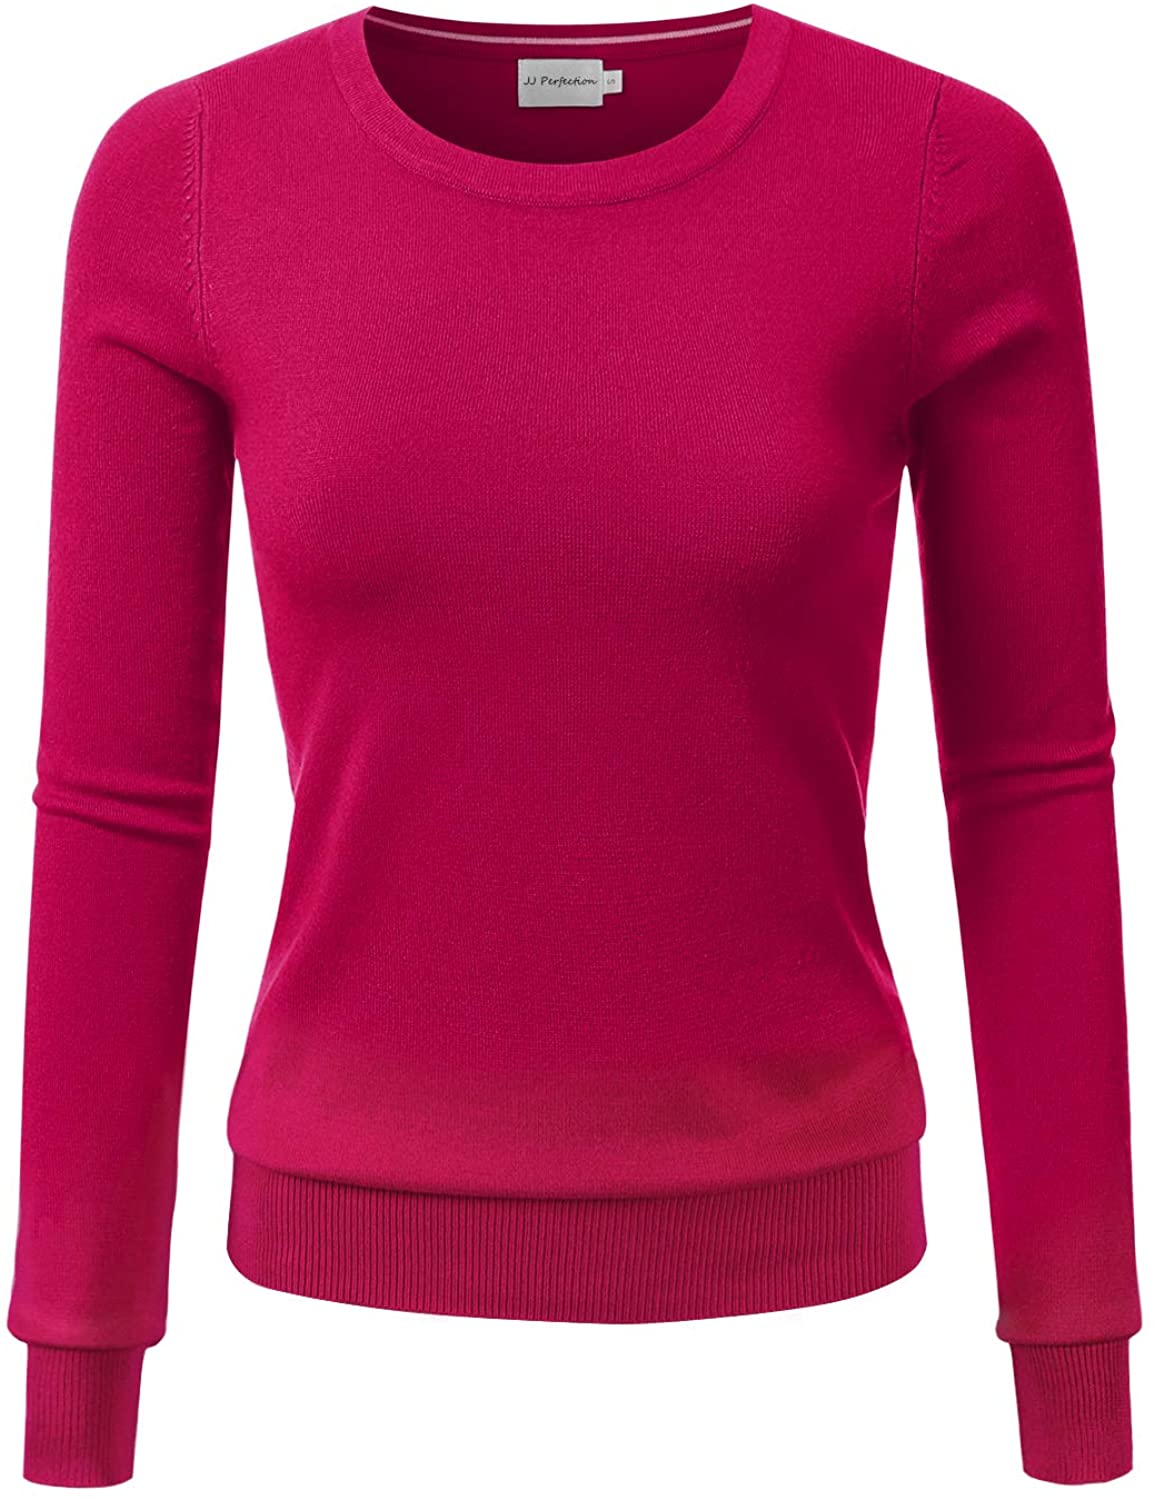 JJ Perfection Womens Simple Crew Neck Pullover Chic Soft Sweater with Plus Size 